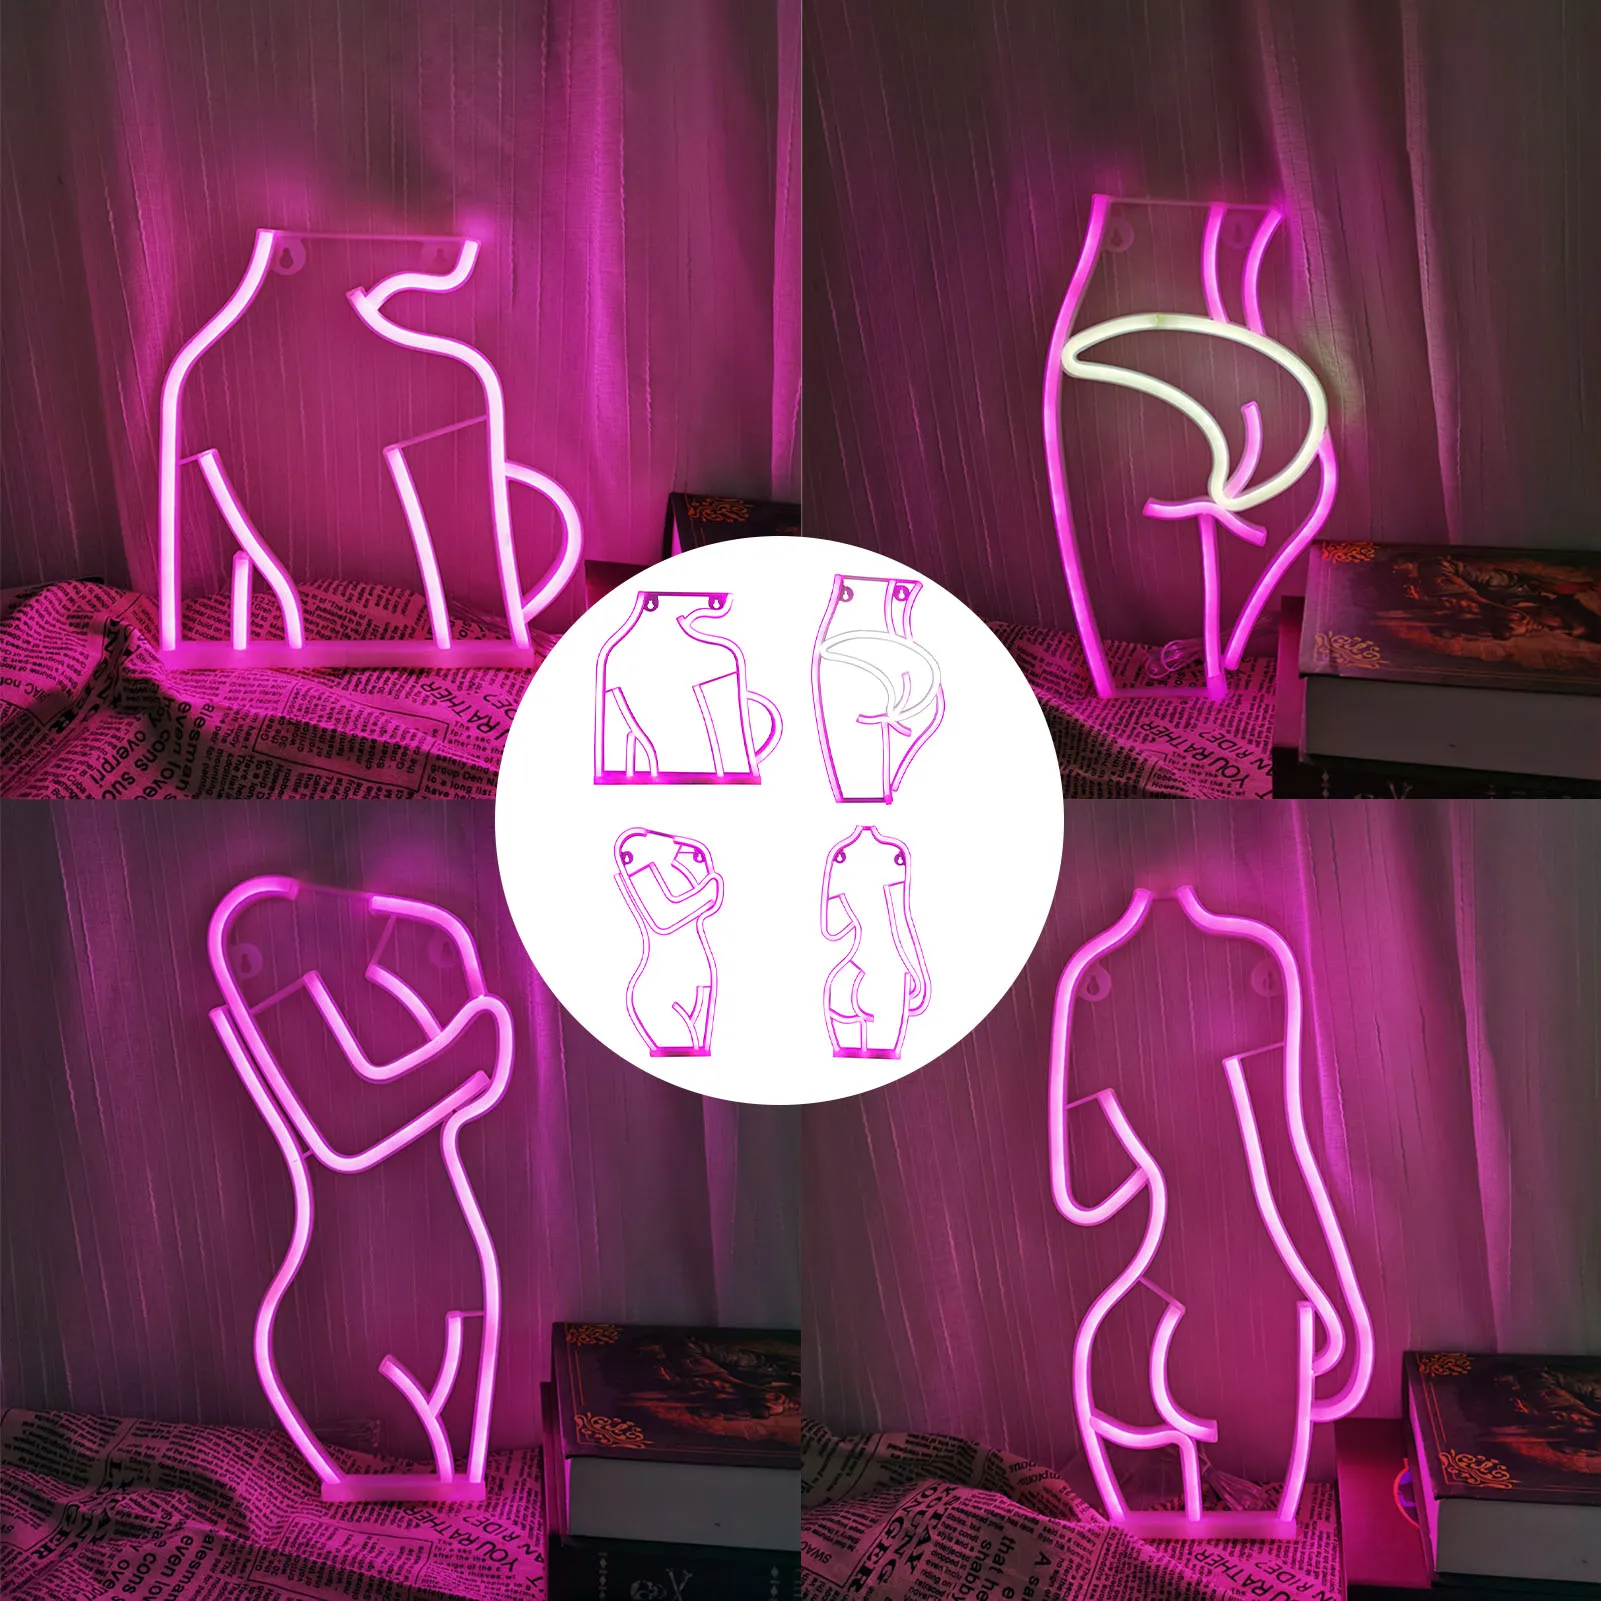 Lady Body LED Neon Sign Lights Female Model Wall Hanging Body Neon Lights For Bar Club KTV Party Home Bedroom Decor